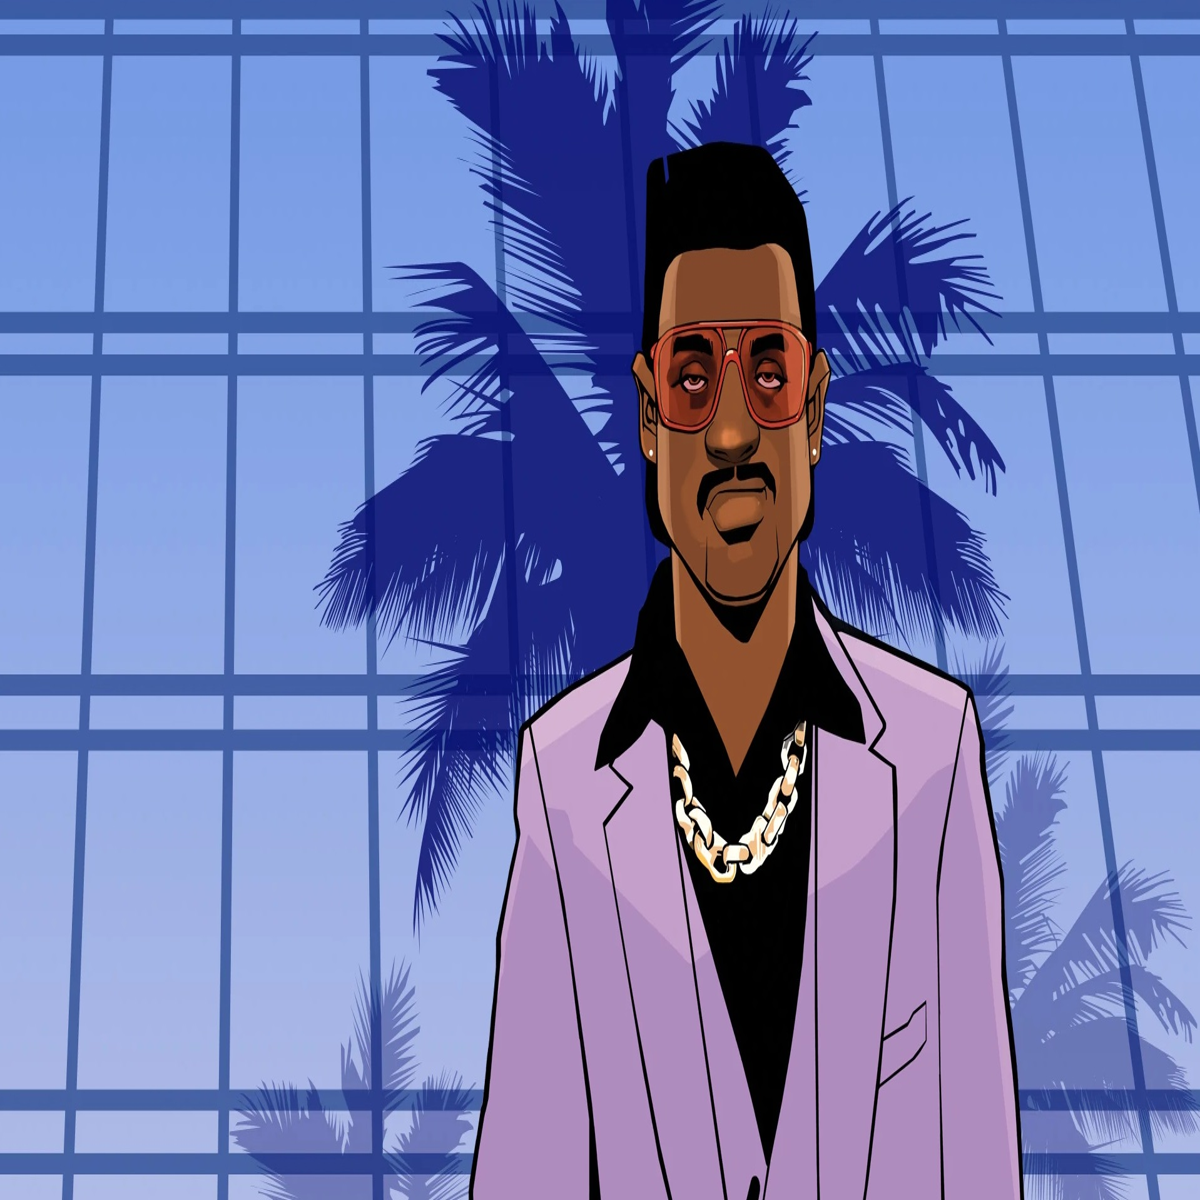 GTA 6 reportedly several years away still, set in Vice City